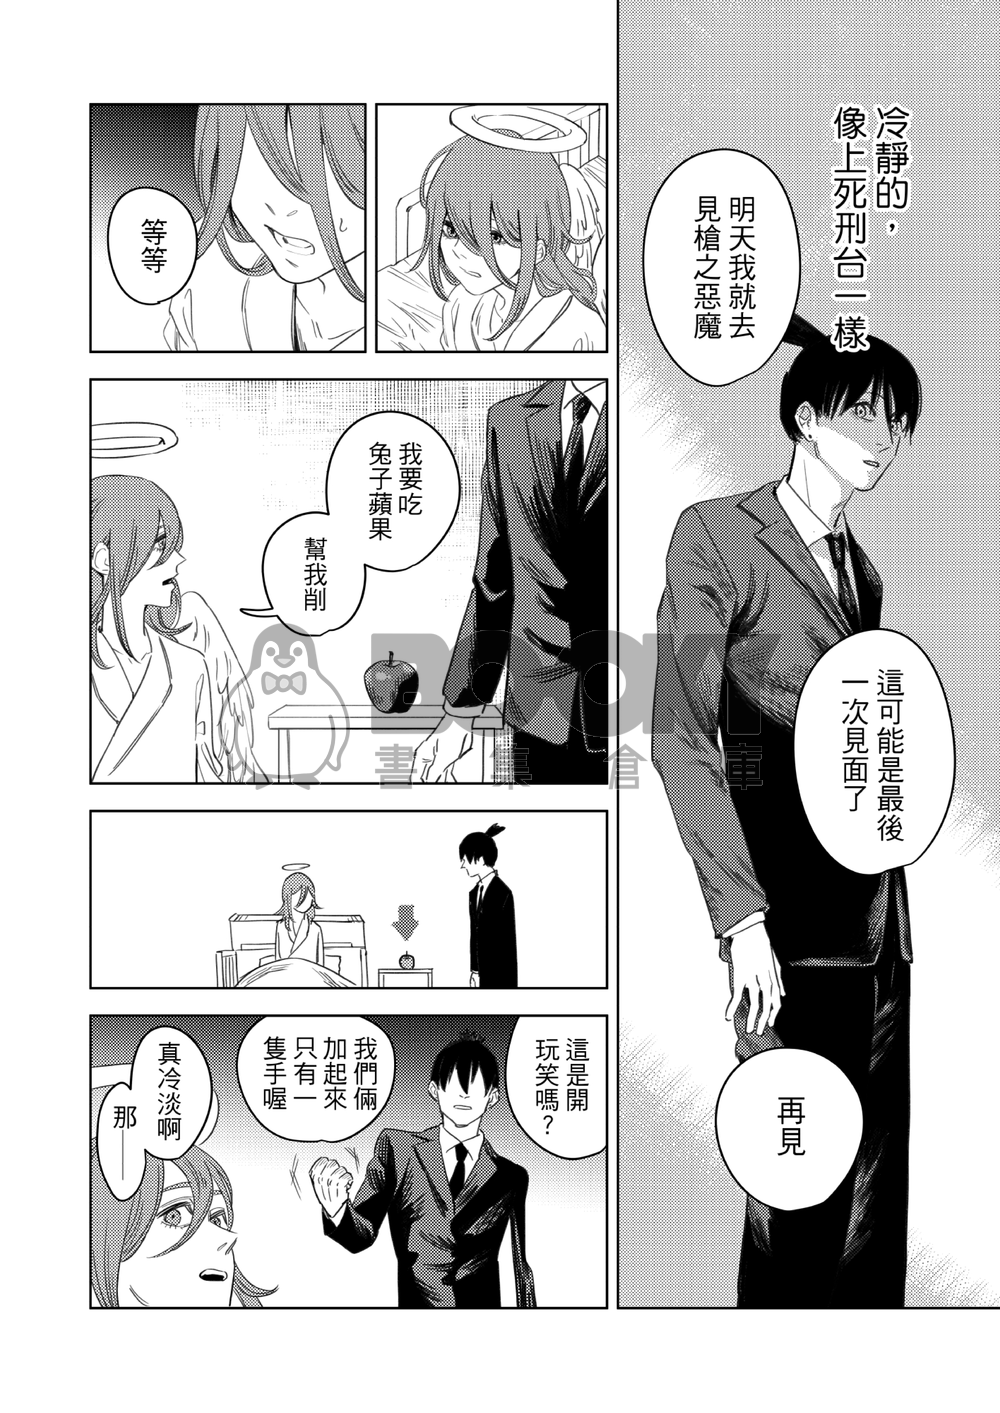 The Last Contract With Devil 試閱圖片